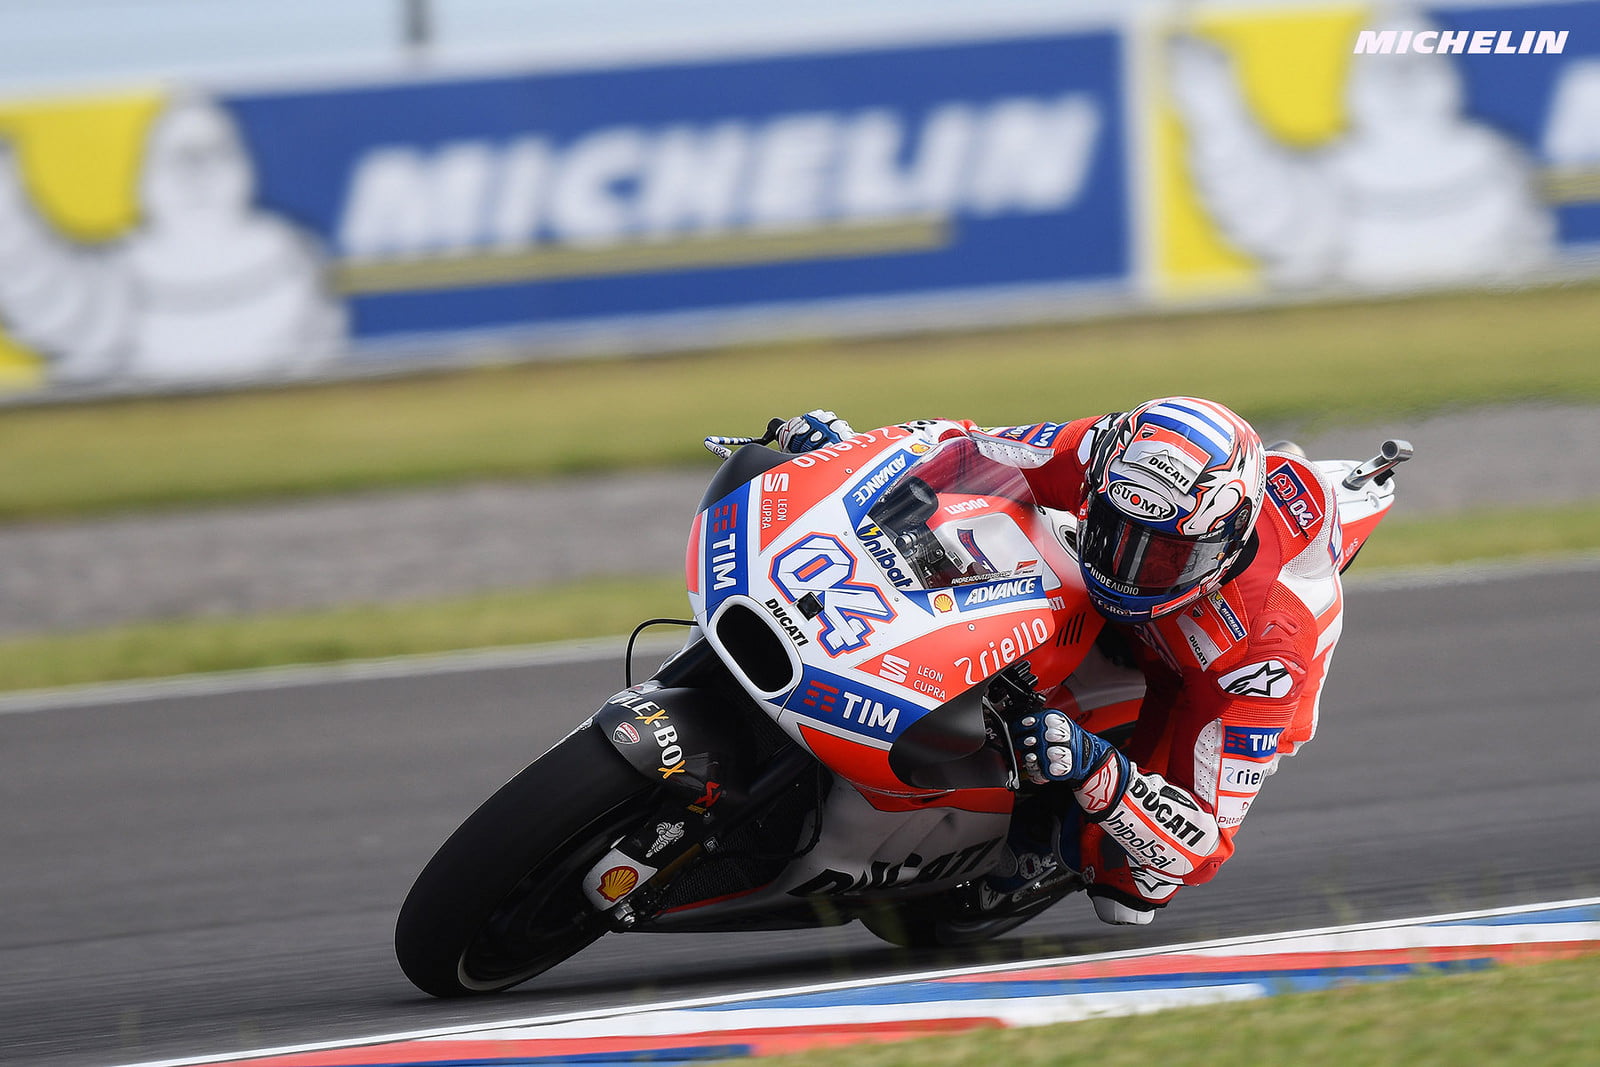 #ArgentinaGP: “Ducati affair” Who is right?